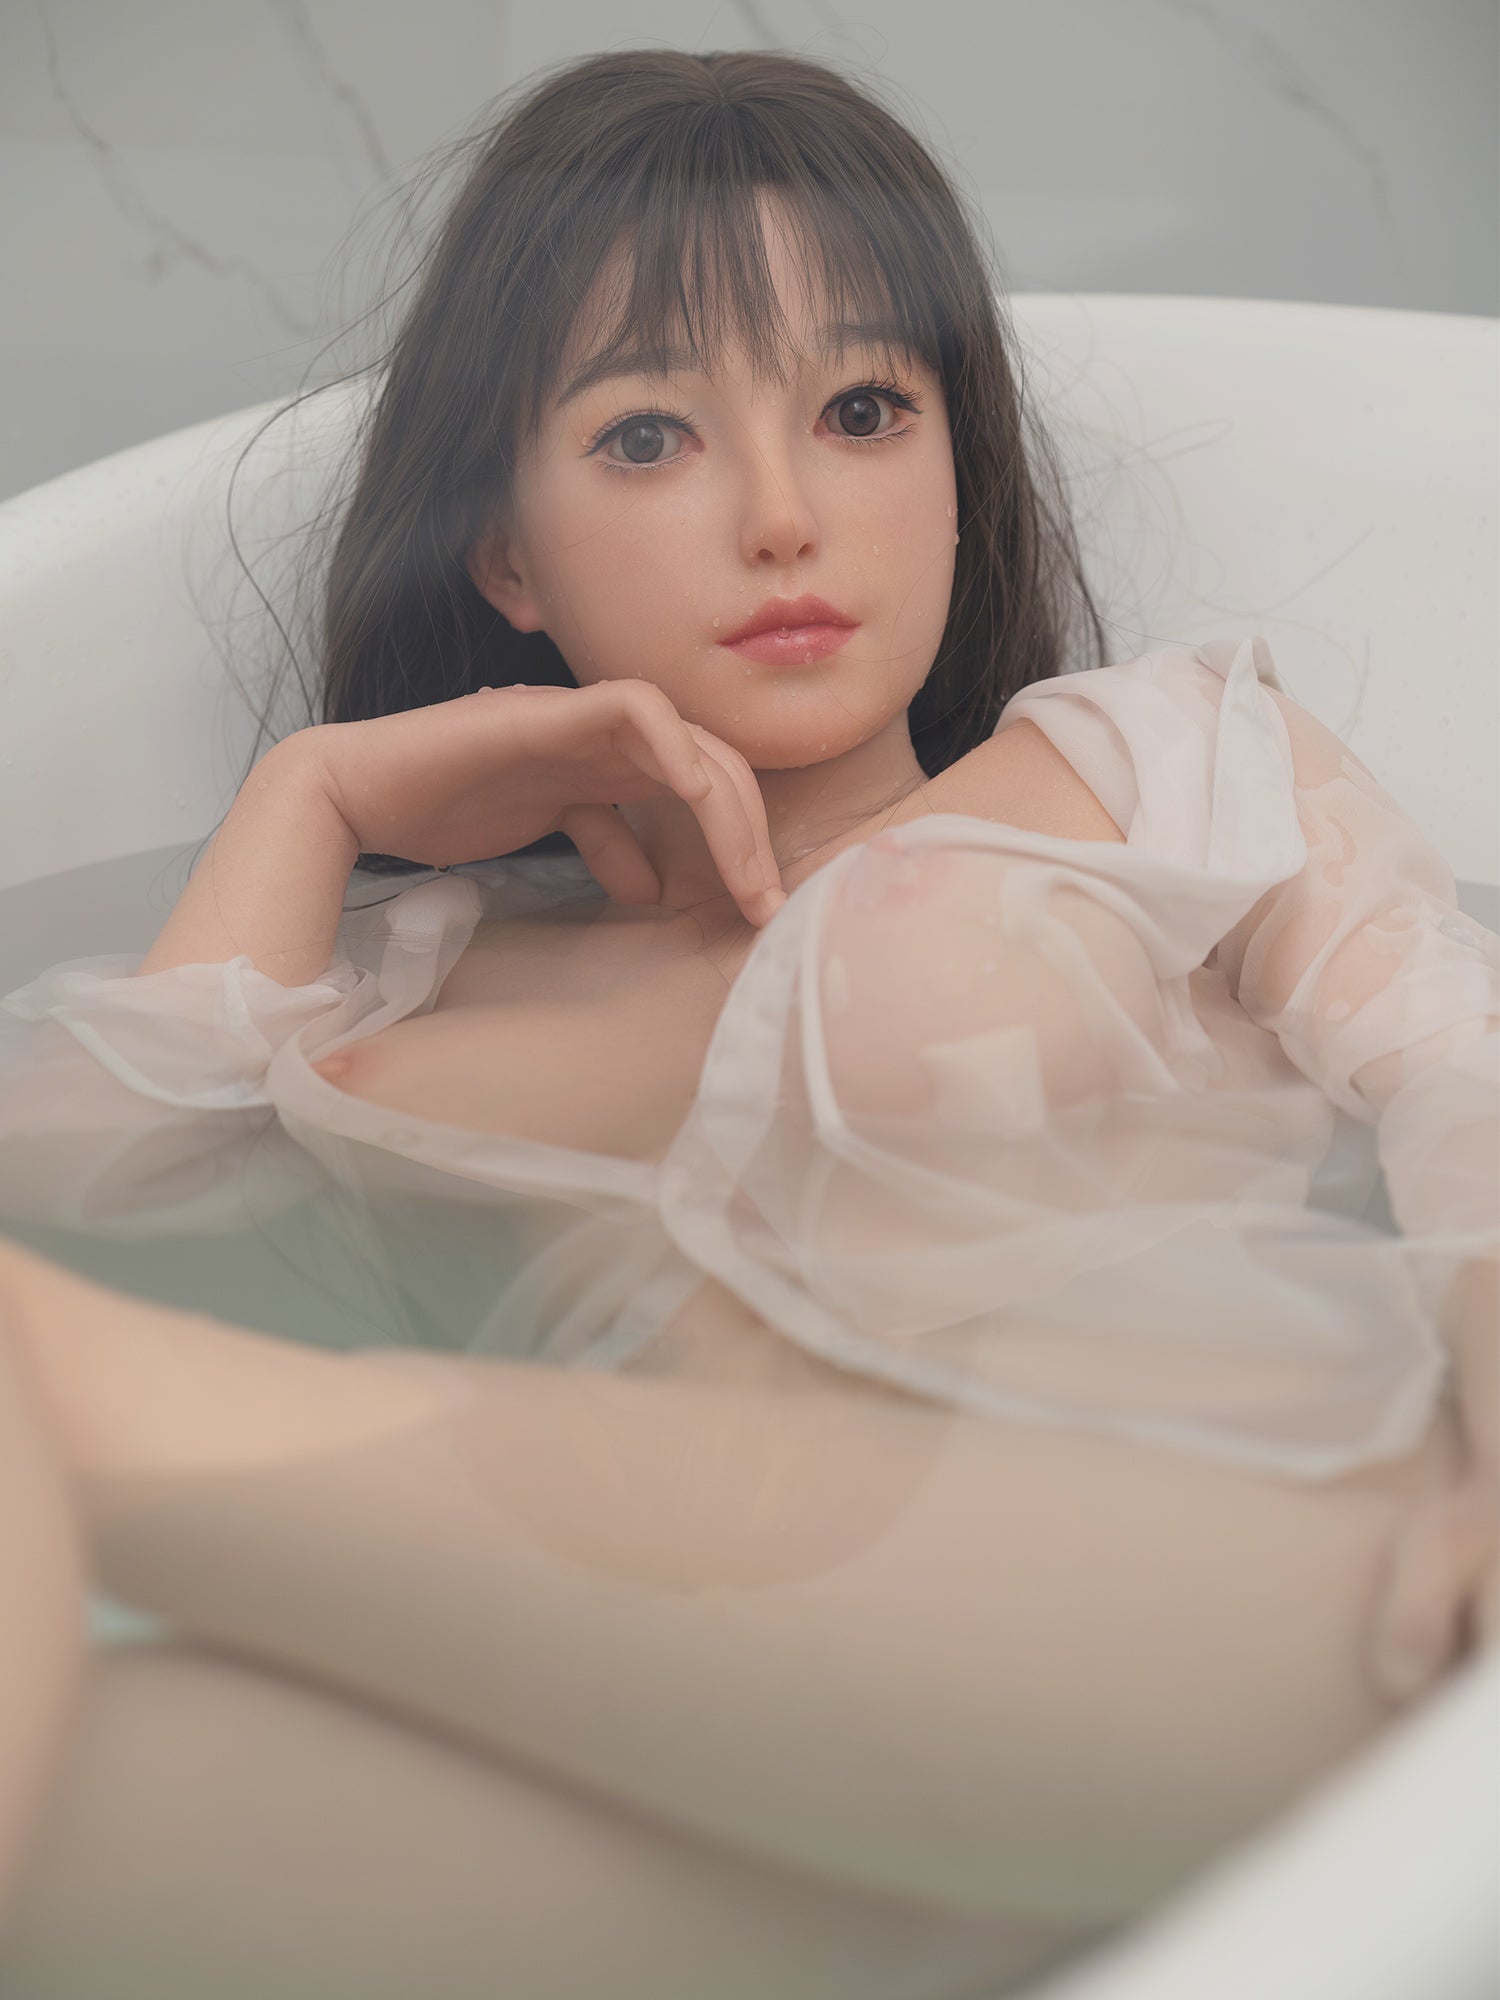 Zelex Doll 165 cm F Fusion - Lina | Buy Sex Dolls at DOLLS ACTUALLY